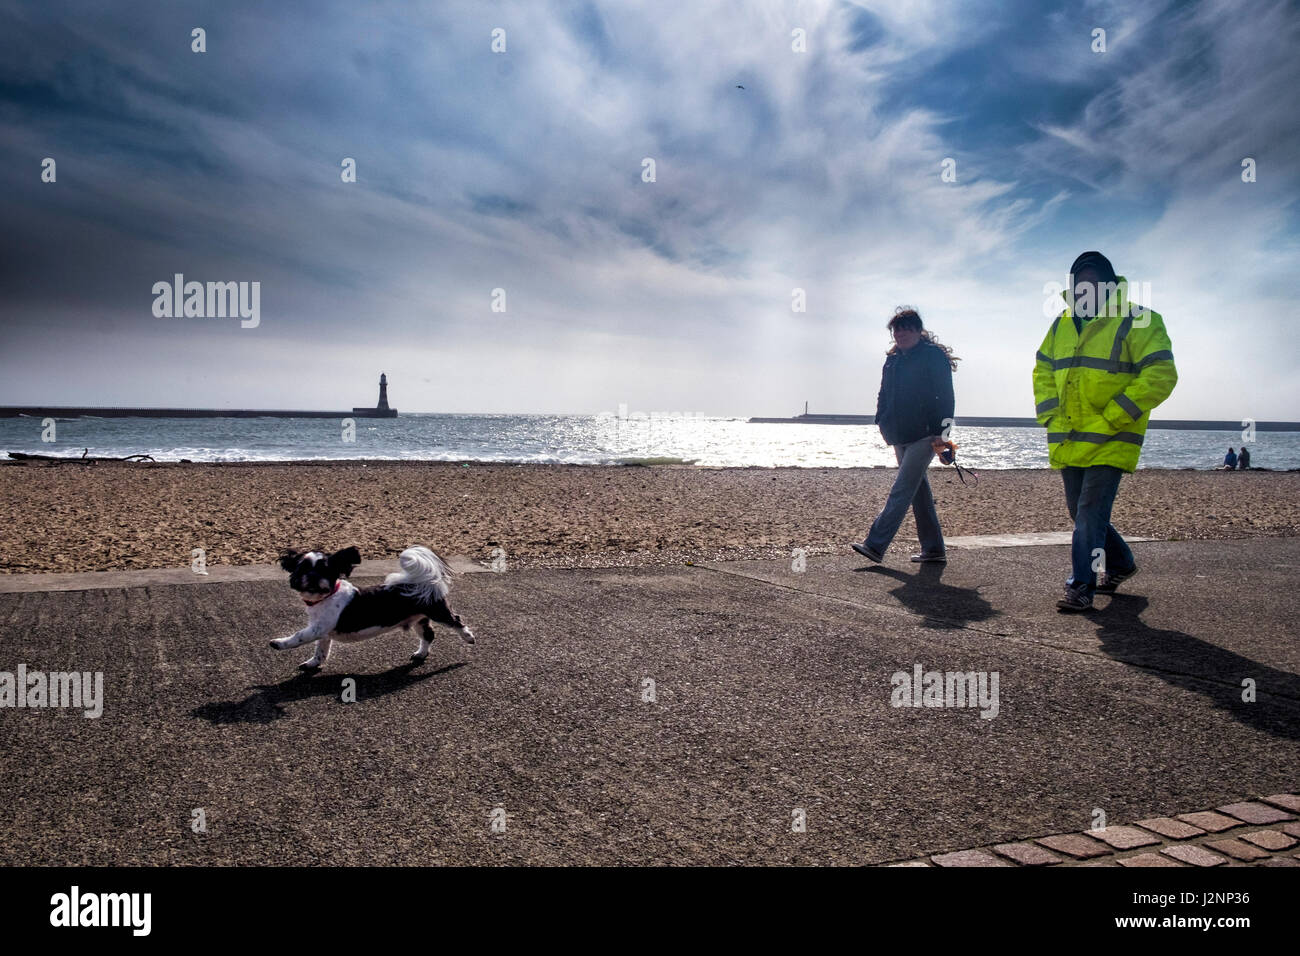 Sunderland, 30th April 2017. It was a bright but windy start to the day in Roker, Sunderland, as dog walkers braved the conditions on the sea front. (c) Paul Swinney/Alamy Live News Stock Photo